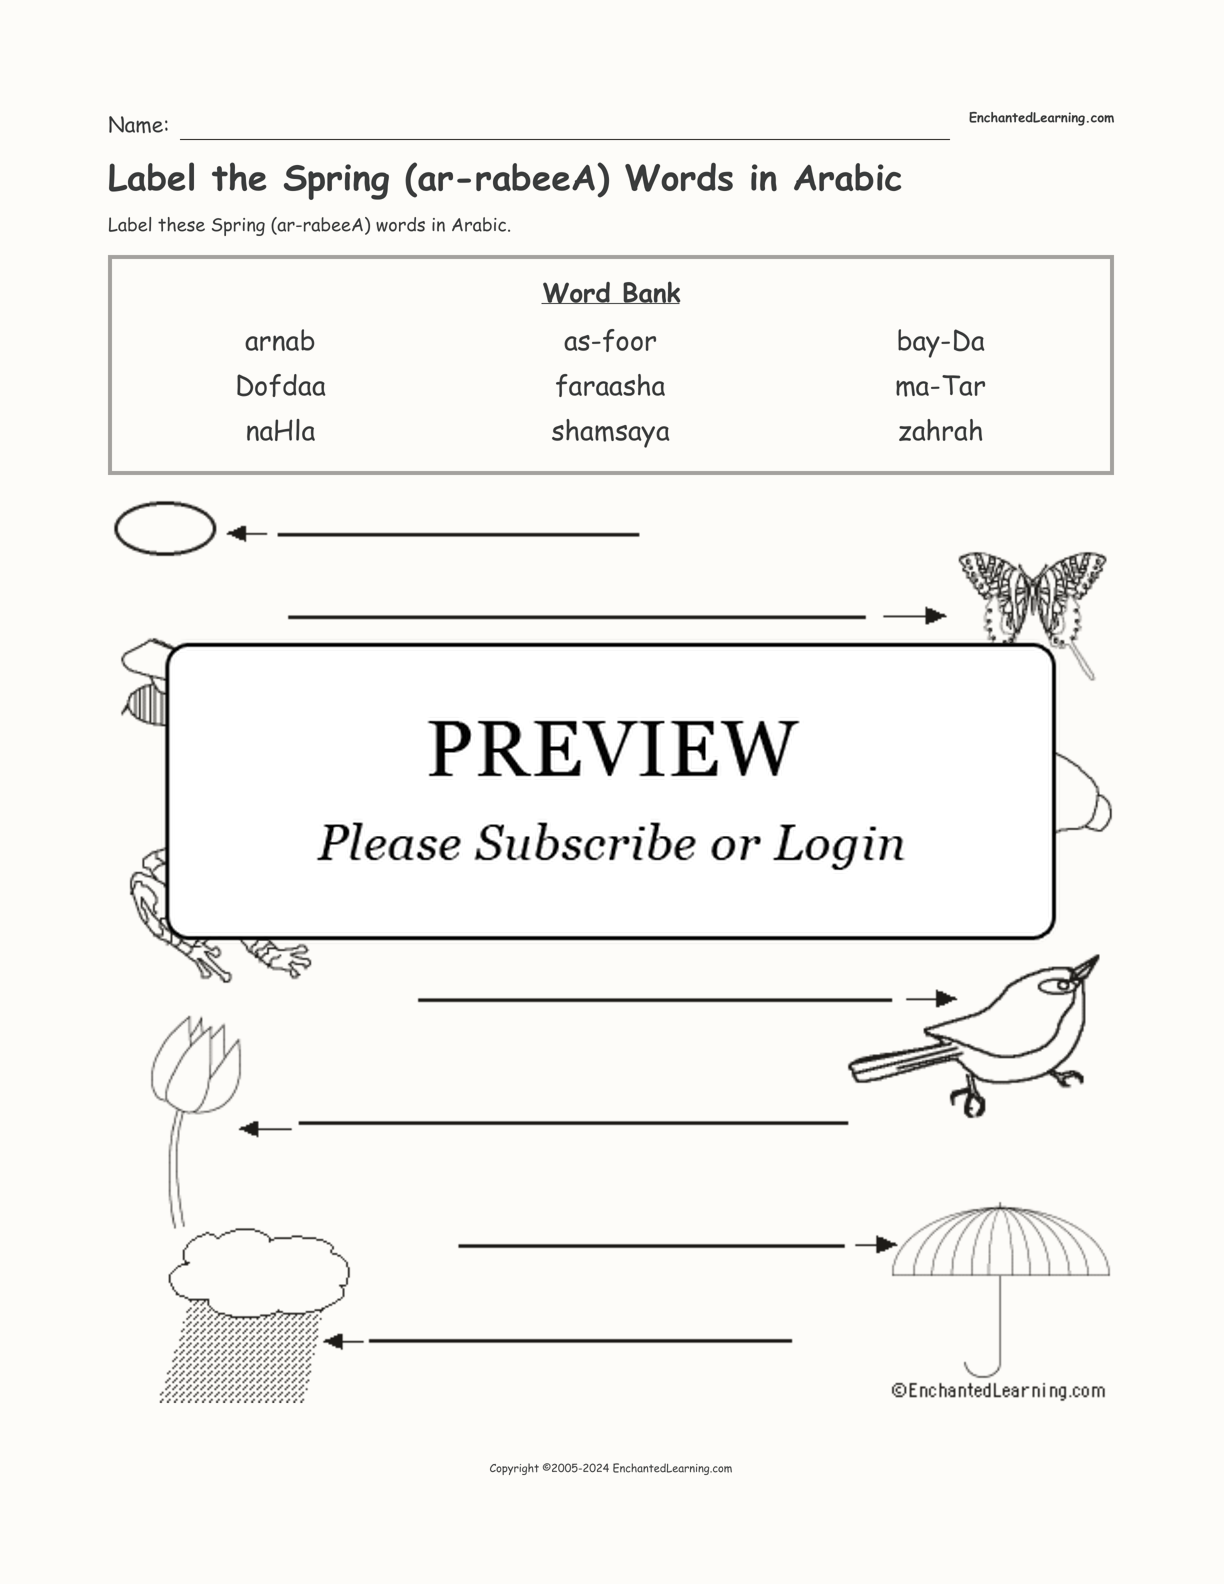 Label the Spring (ar-rabeeA) Words in Arabic interactive worksheet page 1